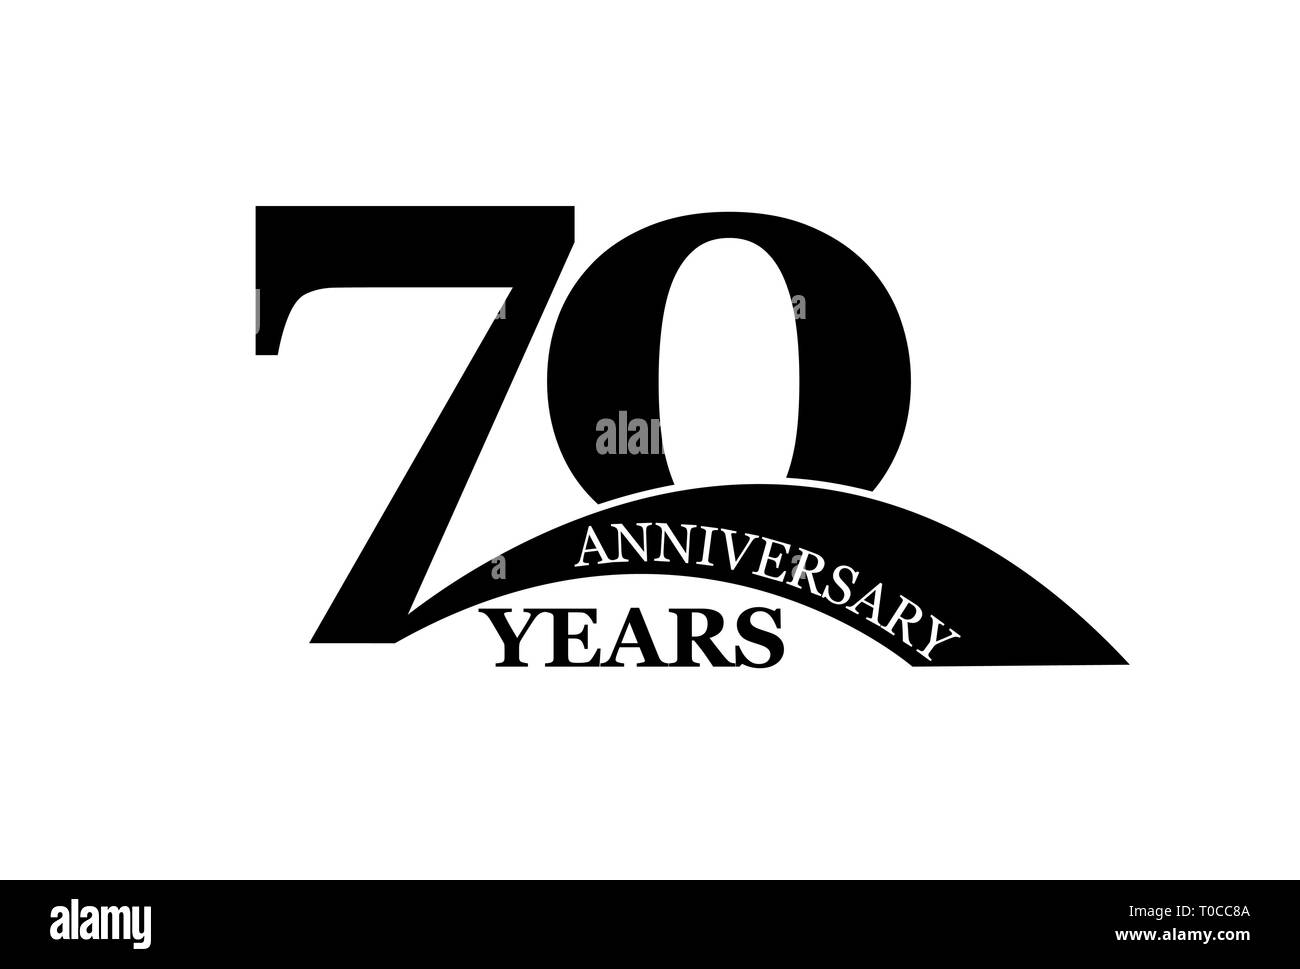 70 years anniversary, simple flat design, logo for design and